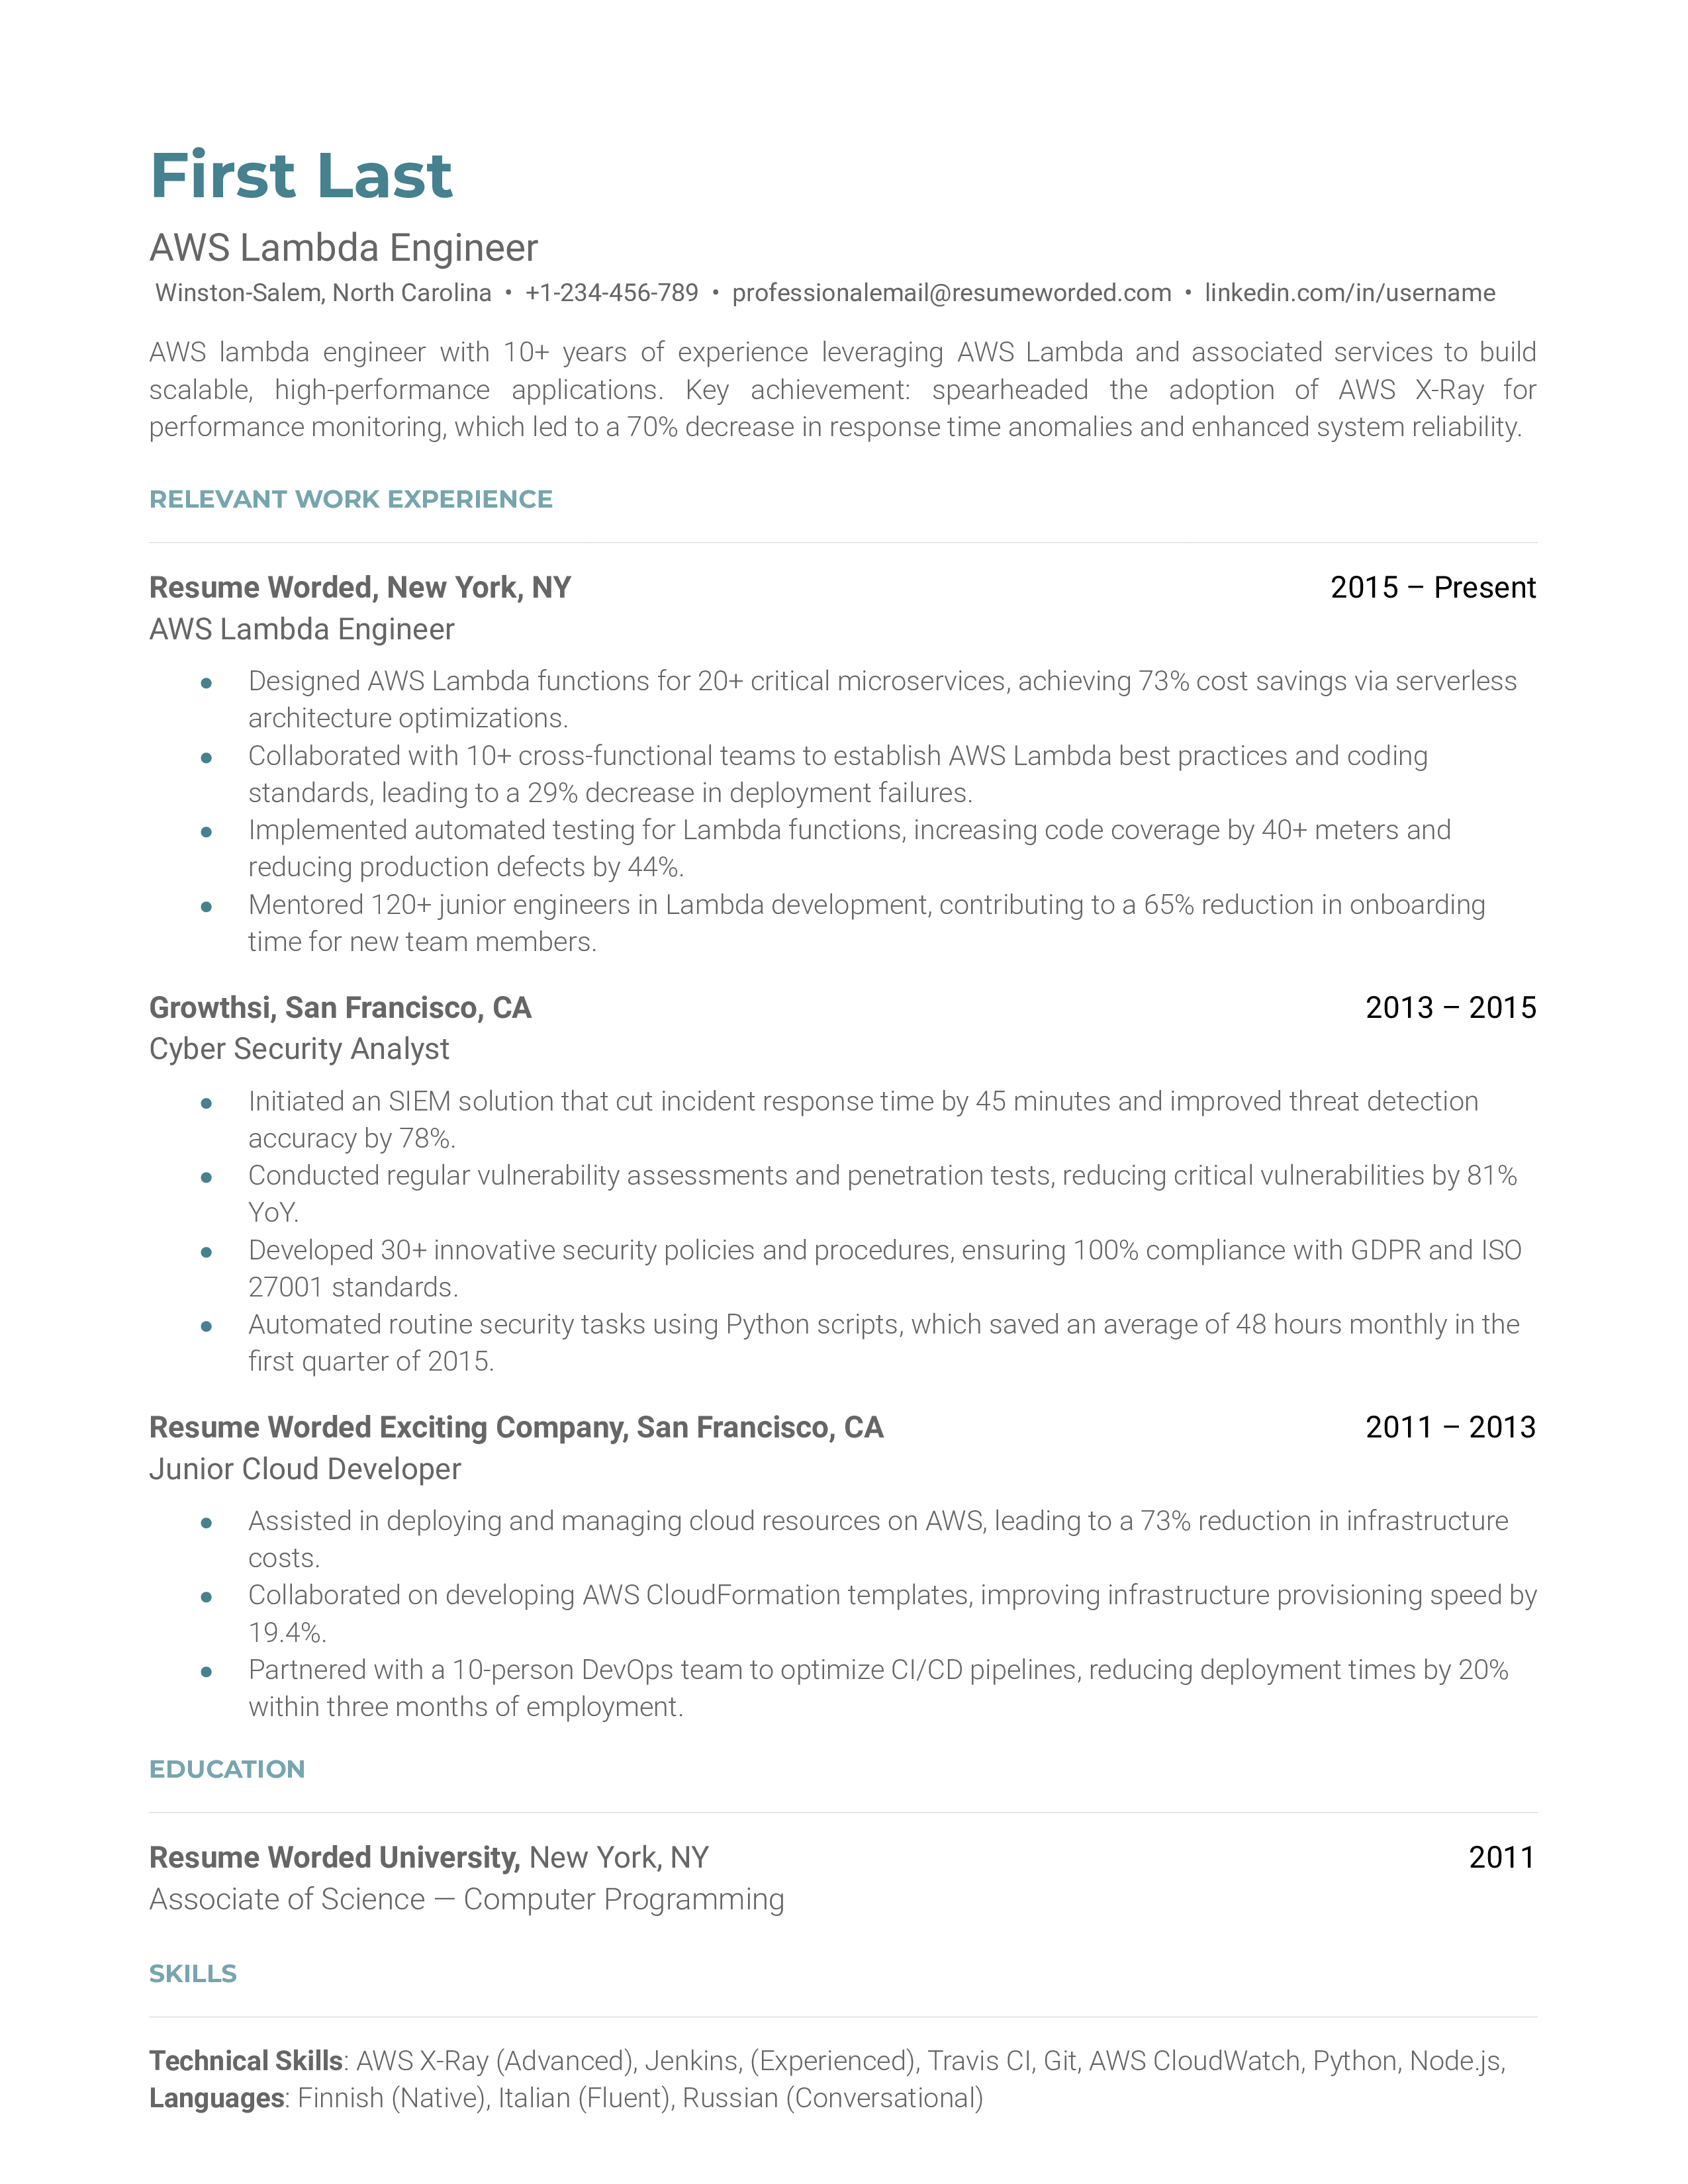 A CV for an AWS Lambda Engineer, showcasing detailed AWS-specific experience and certifications.